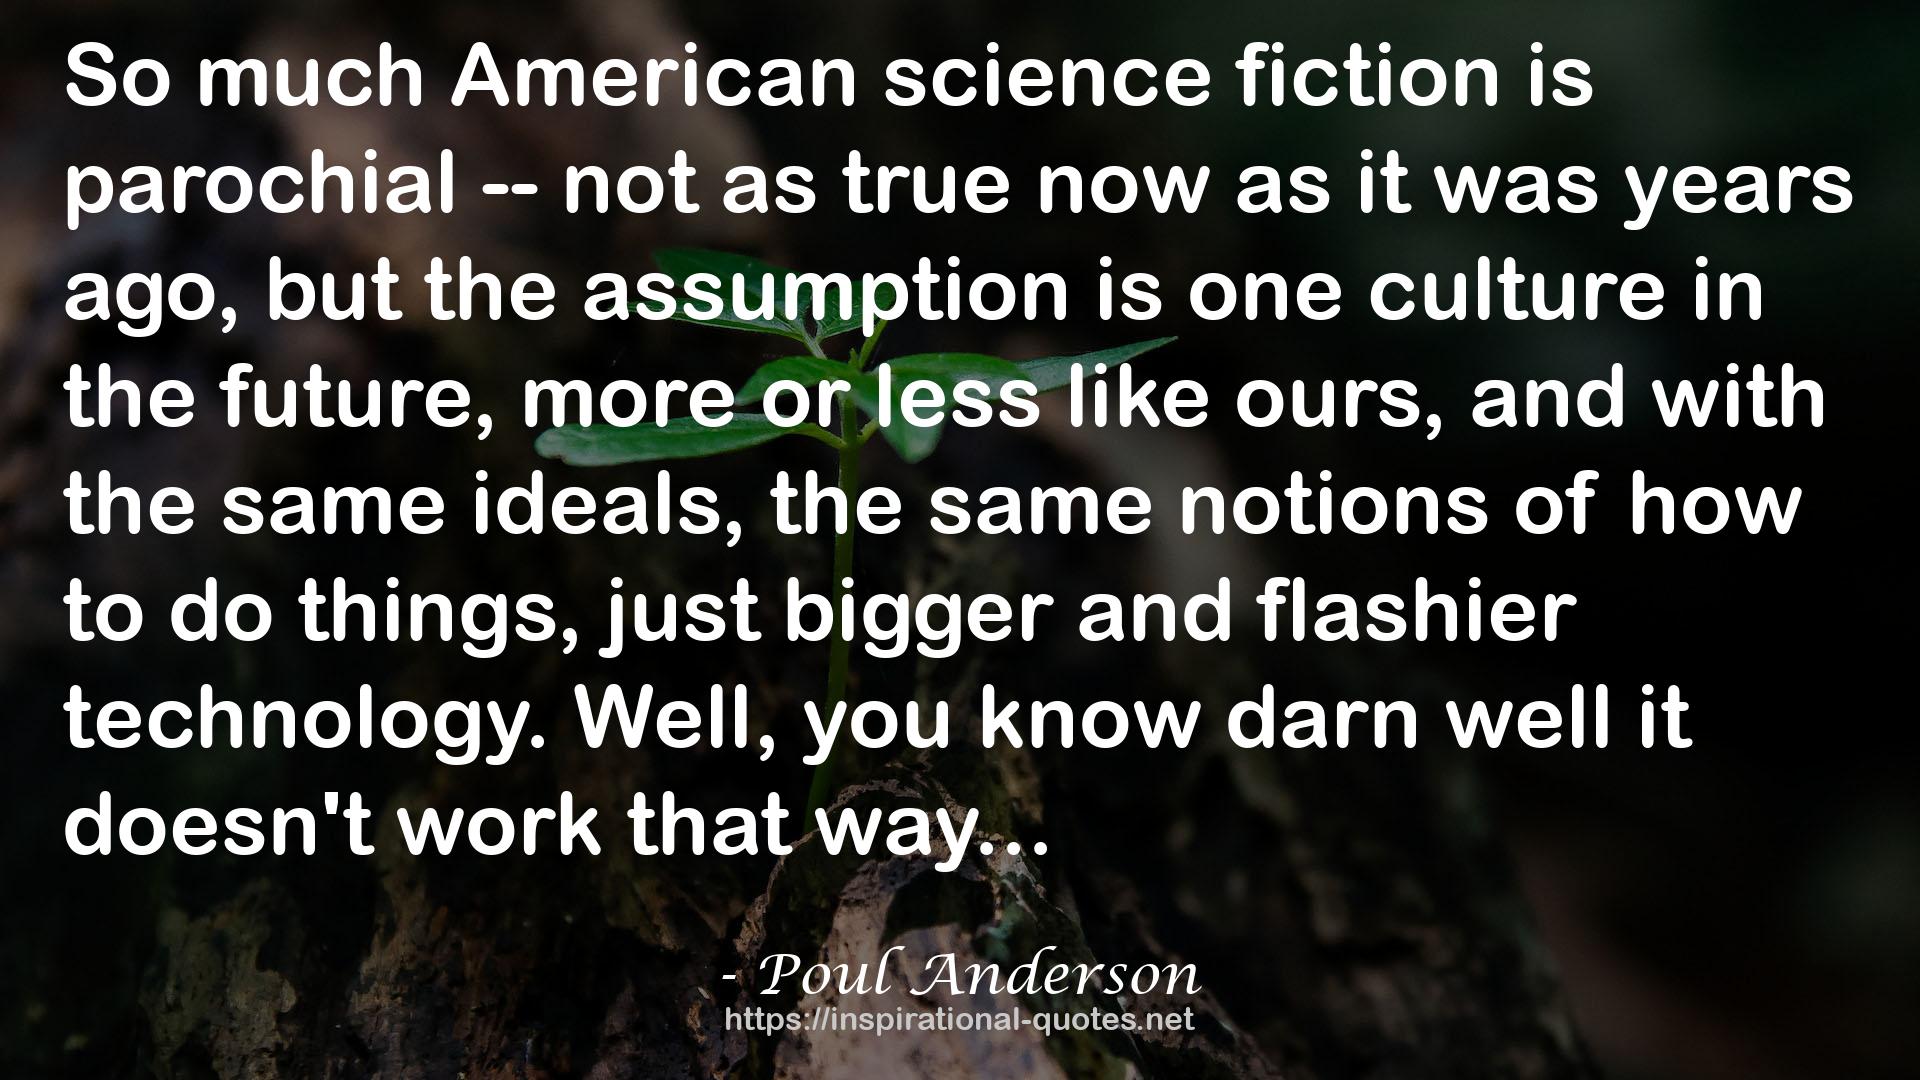 Poul Anderson QUOTES